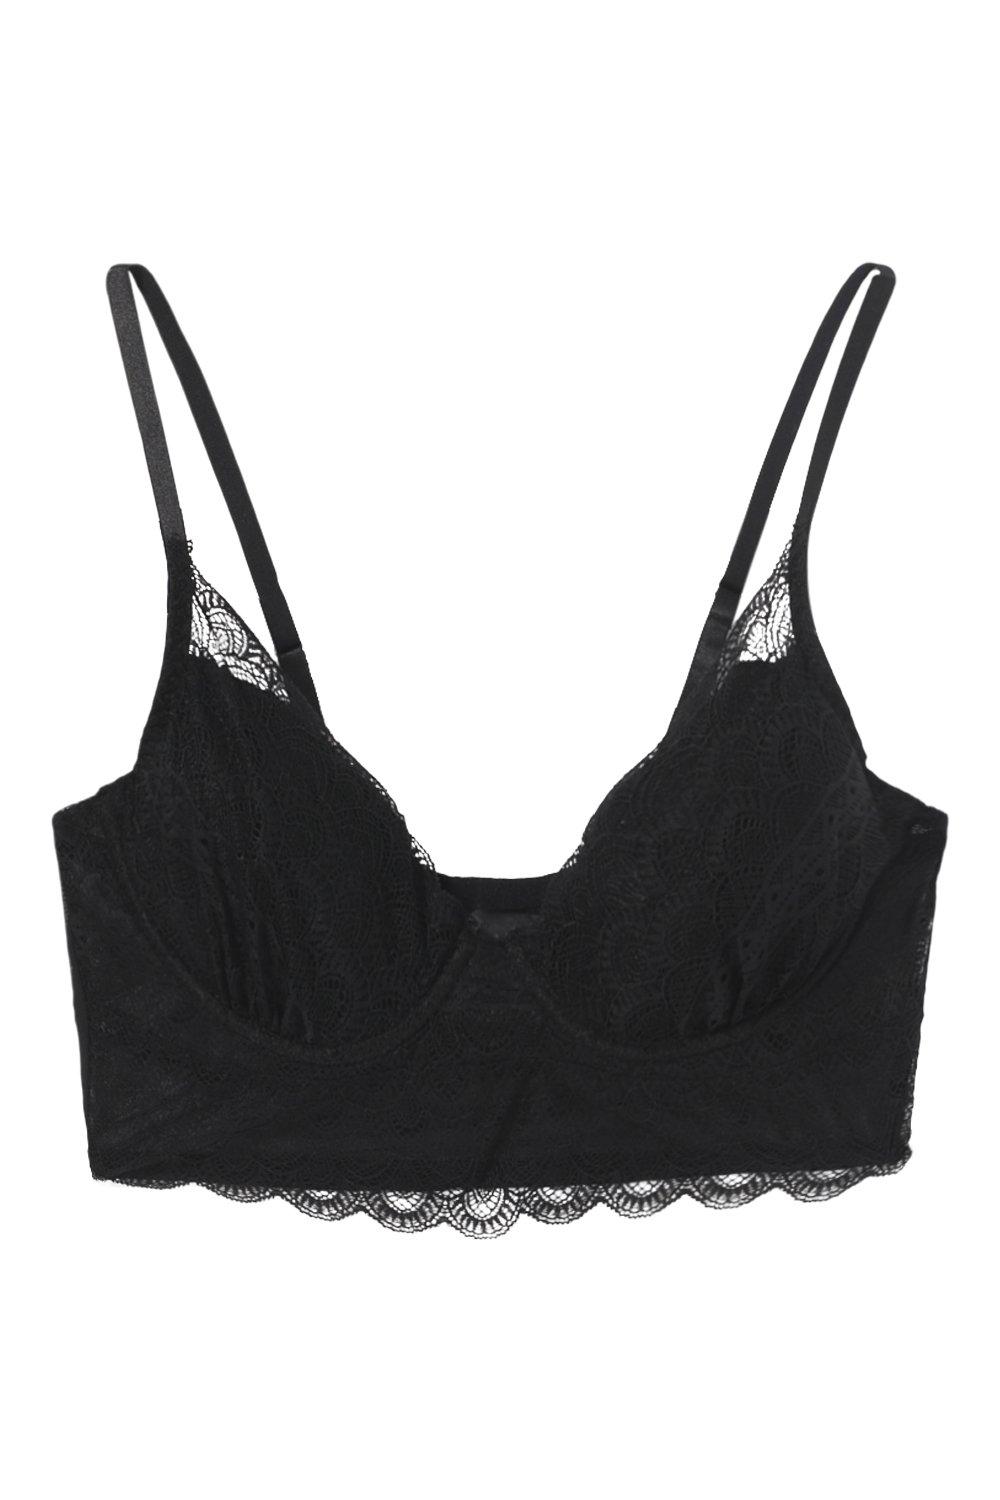 Push-Up Bras for Women No Underwire Full Coverage Lace Longline